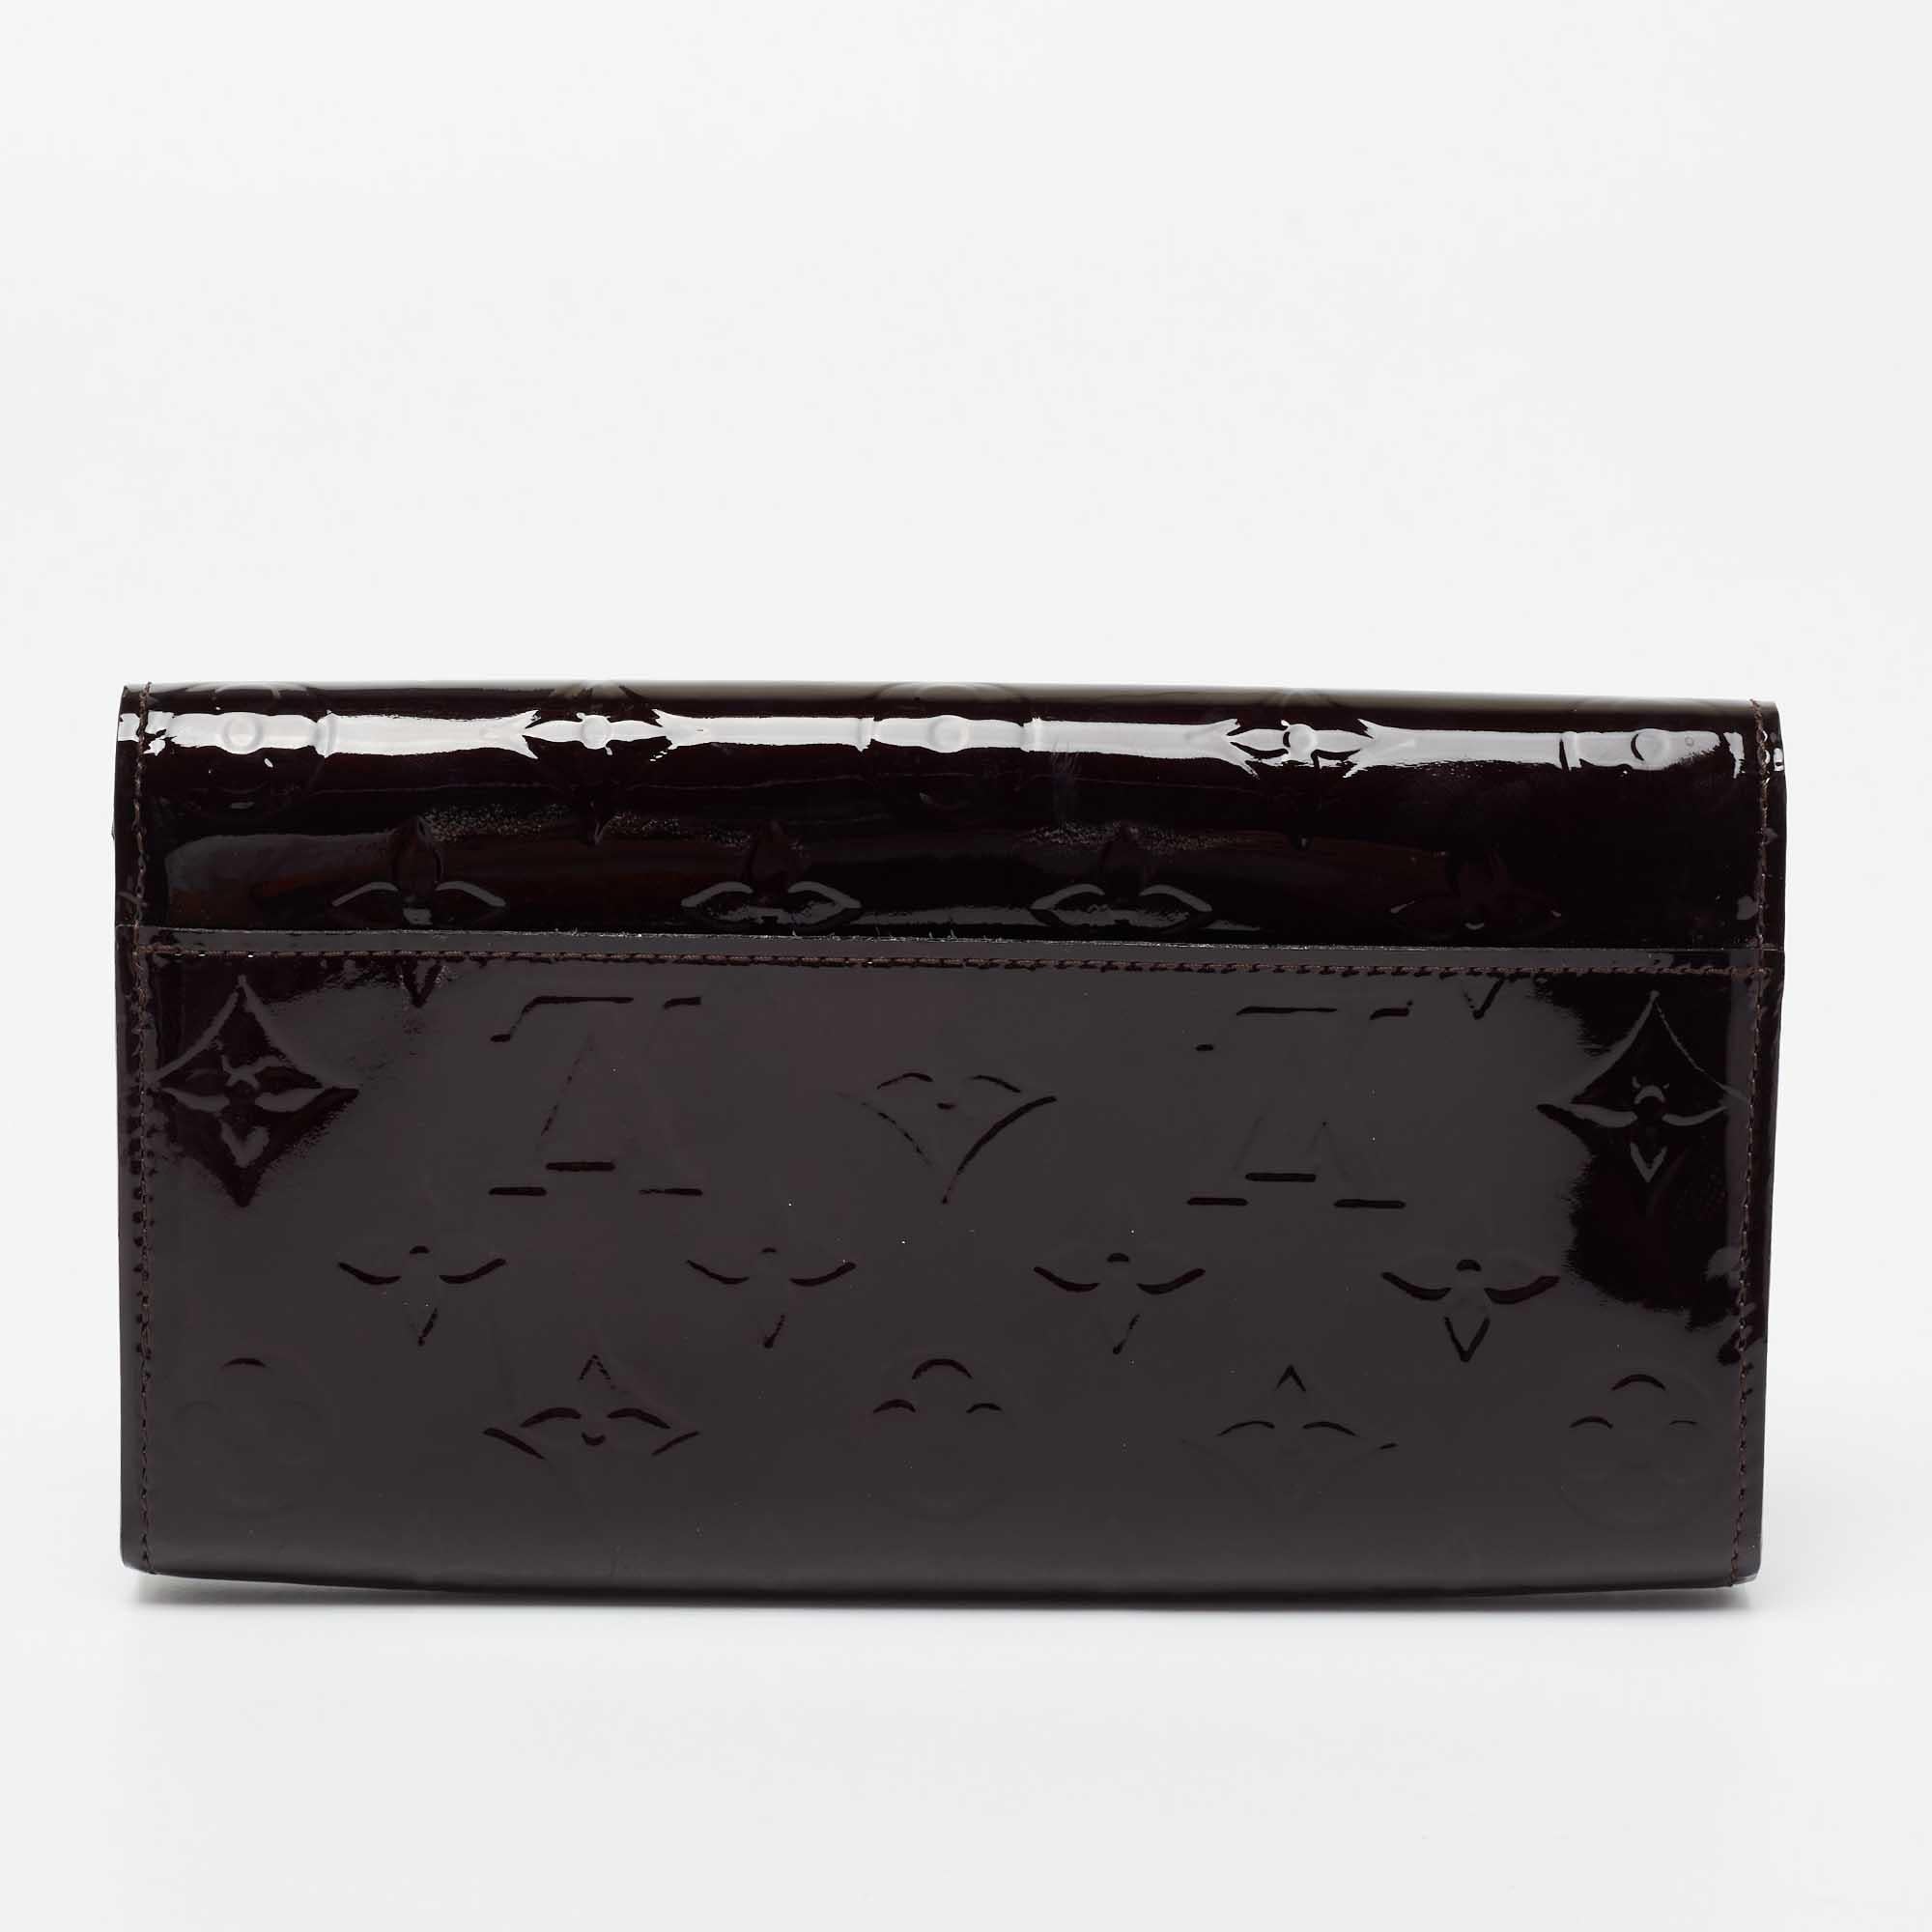 Made using Monogram Vernis, this wallet from Louis Vuitton has a simple look and functional quality. The flap opens to a sleek interior featuring a zip pocket and card slots.

